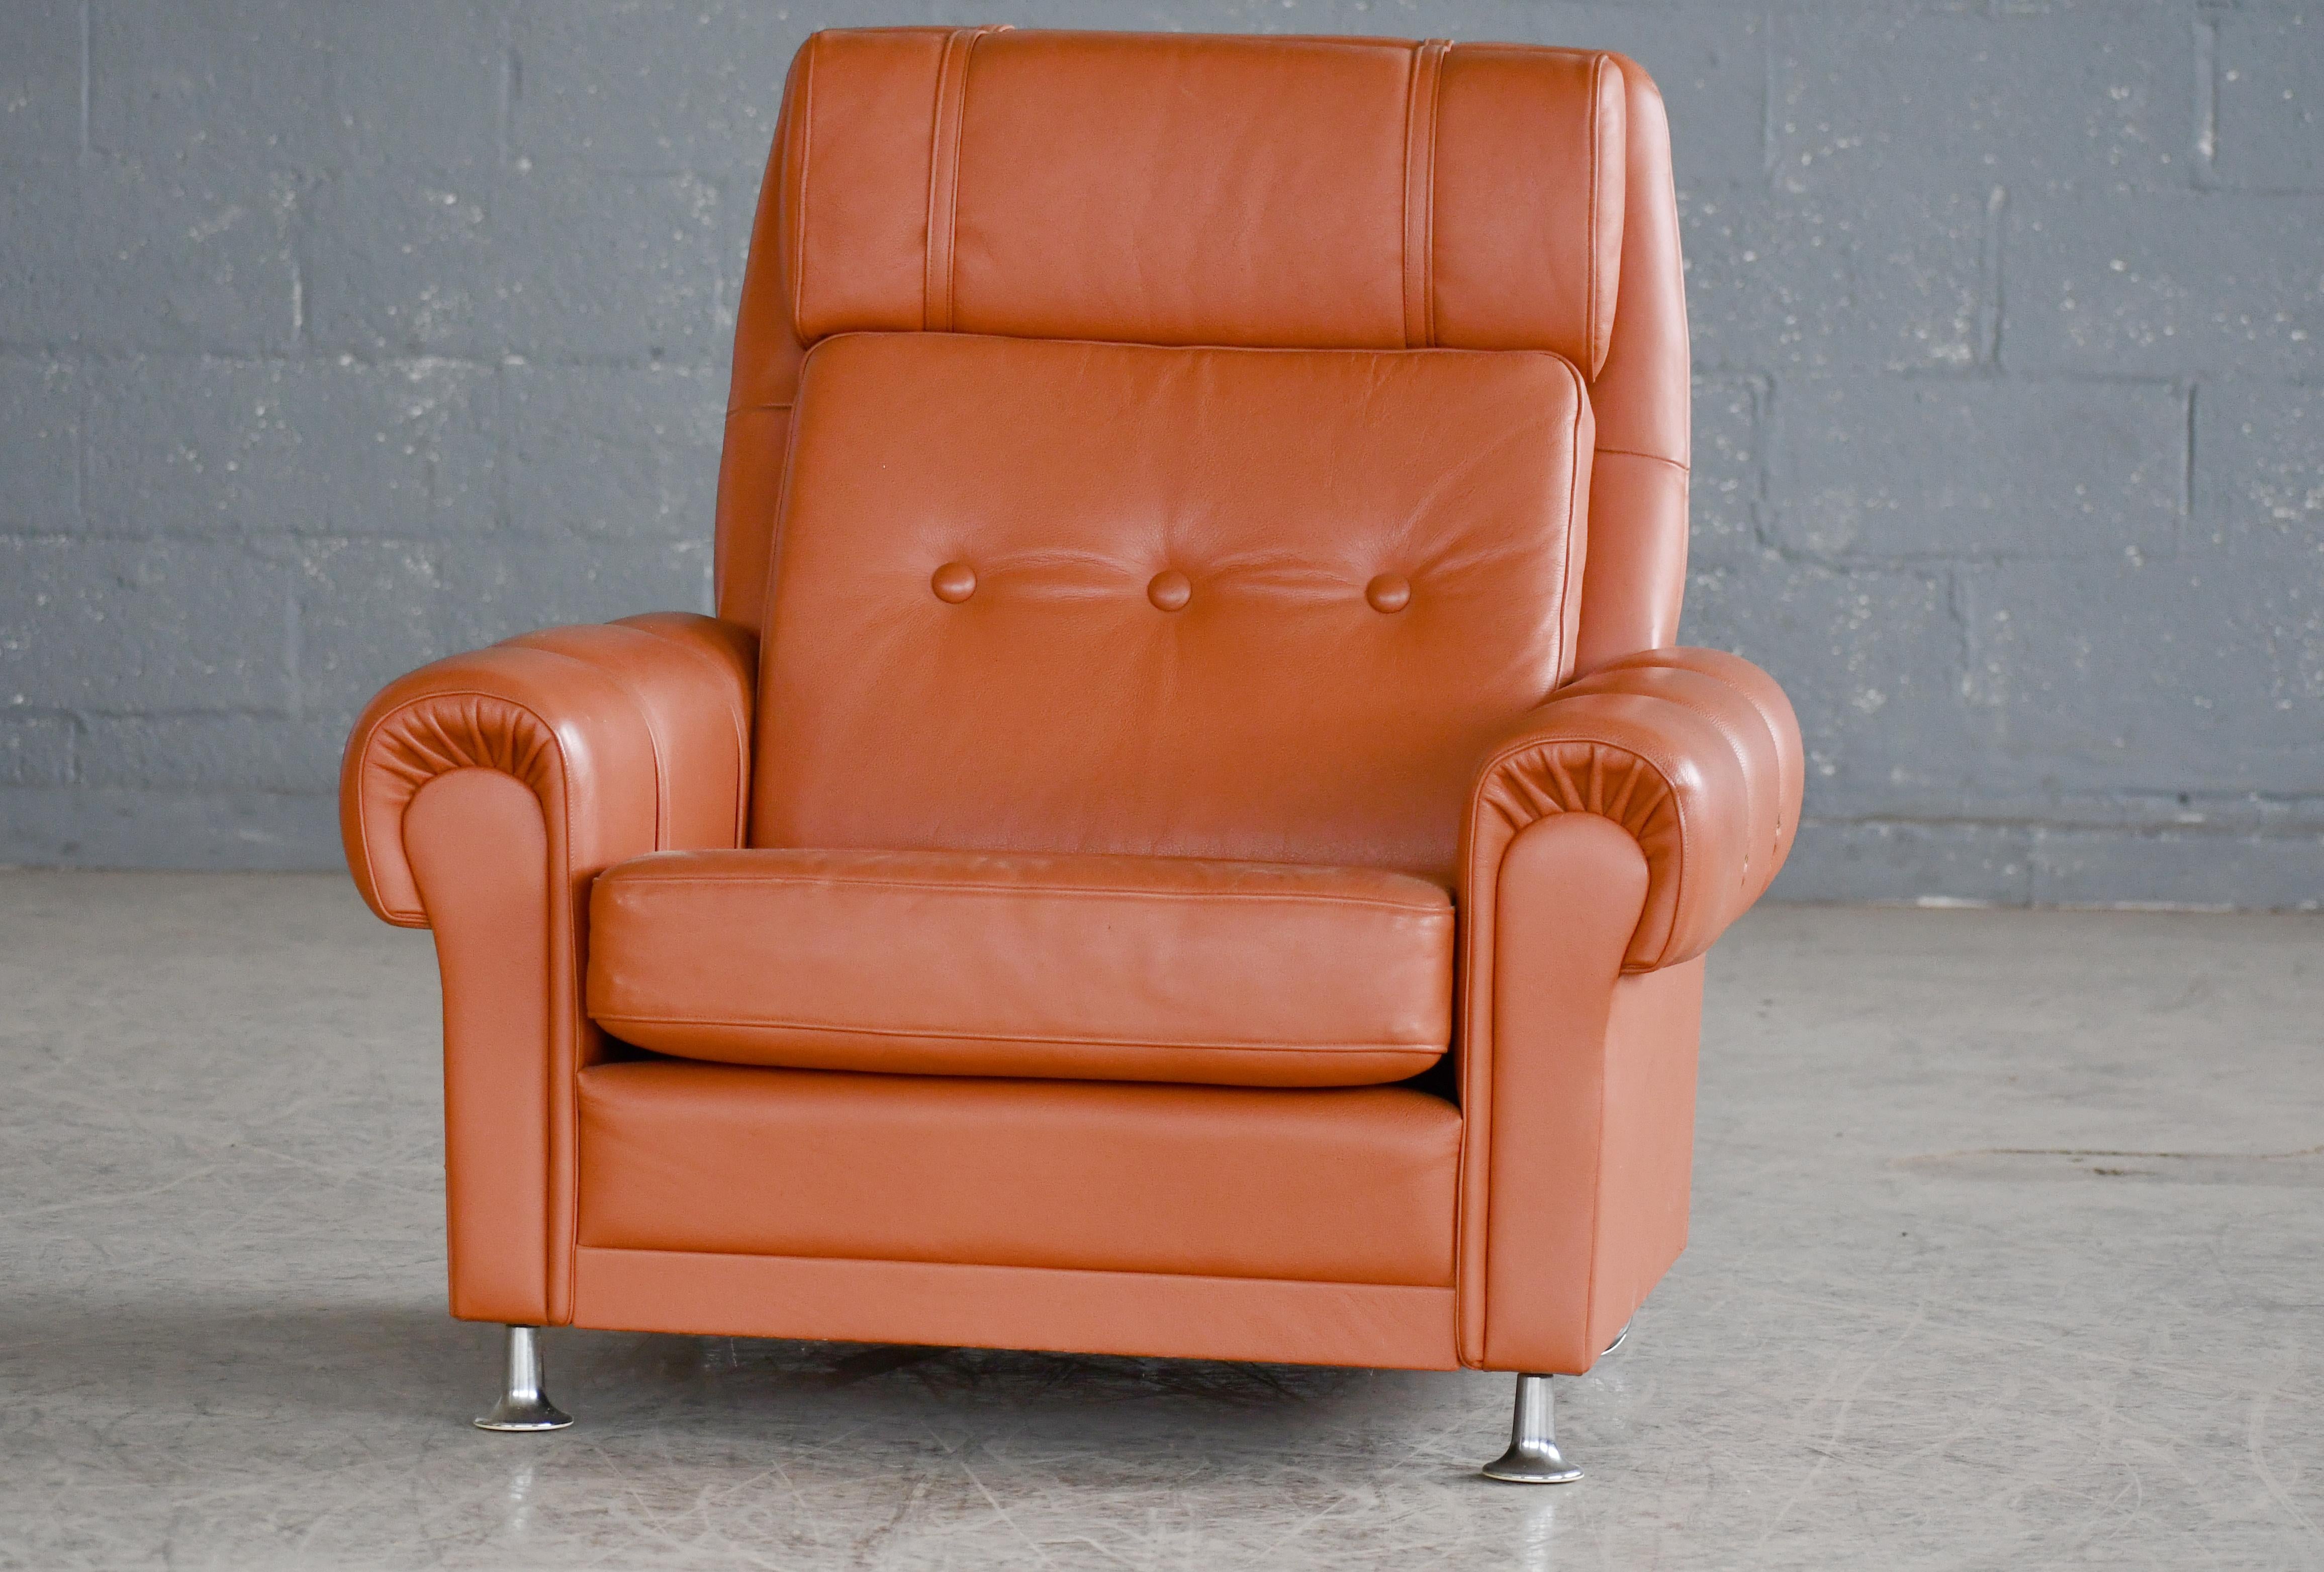 Late 20th Century Illum Wikkelsø Style Leather Lounge Chair with Ottoman Cognac Colored Leather  For Sale